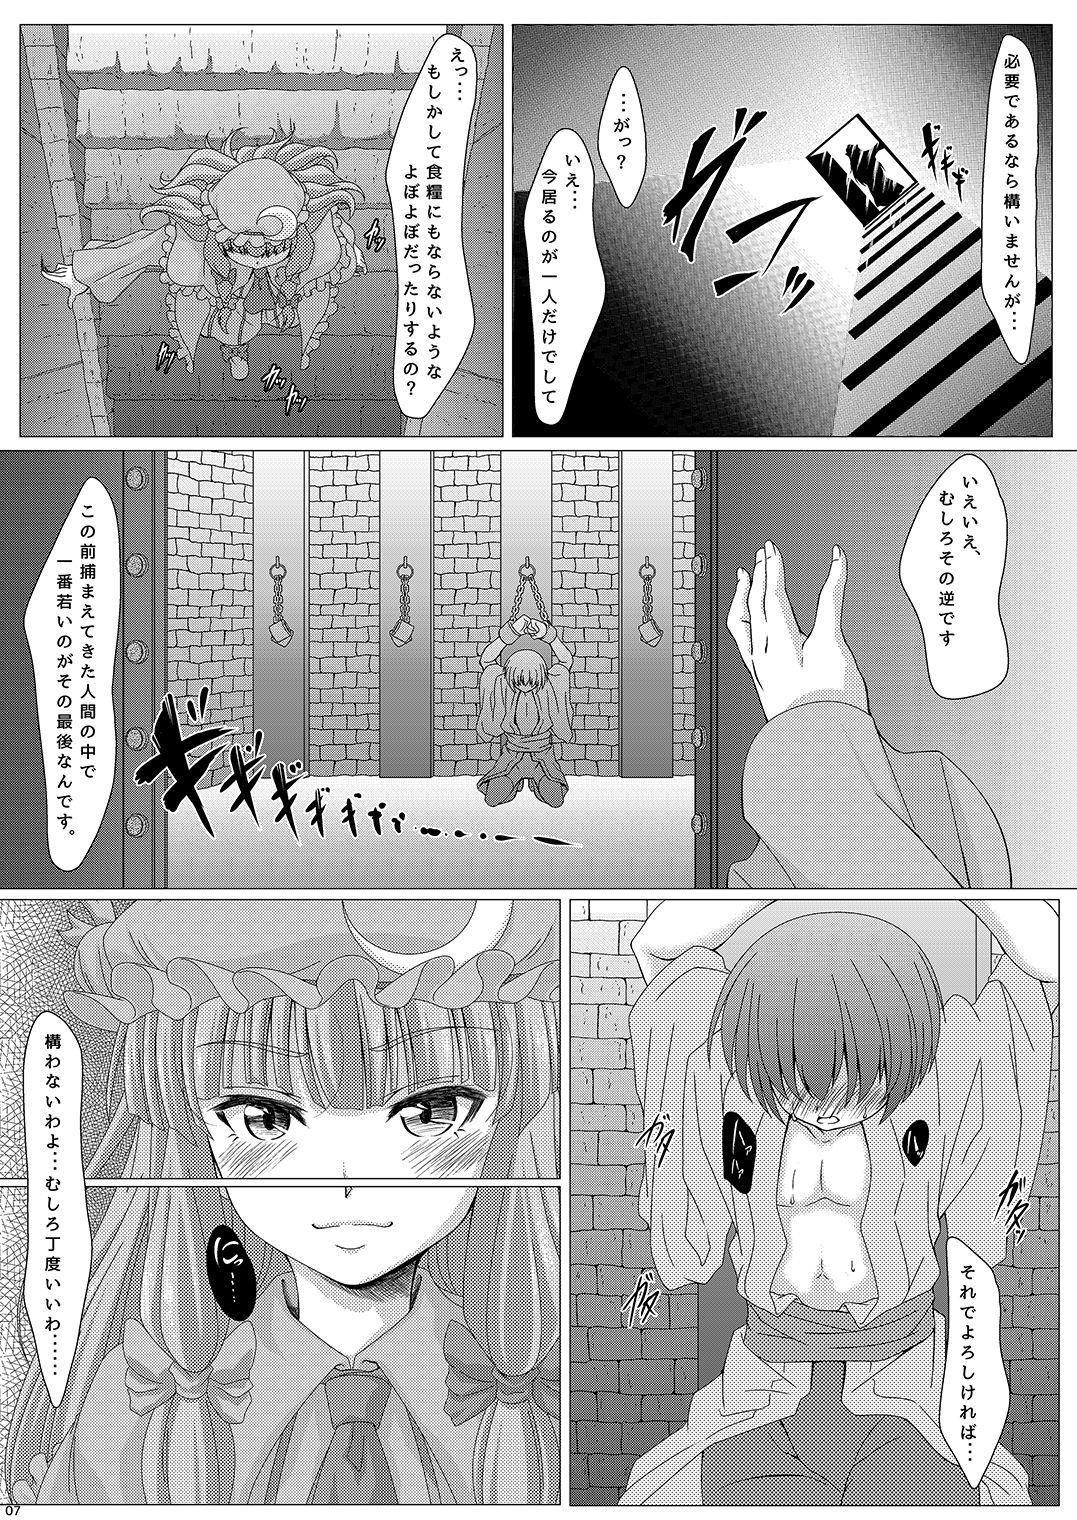 Webcamchat Touhouhimekamiden Ni - Touhou project Analsex - Page 6